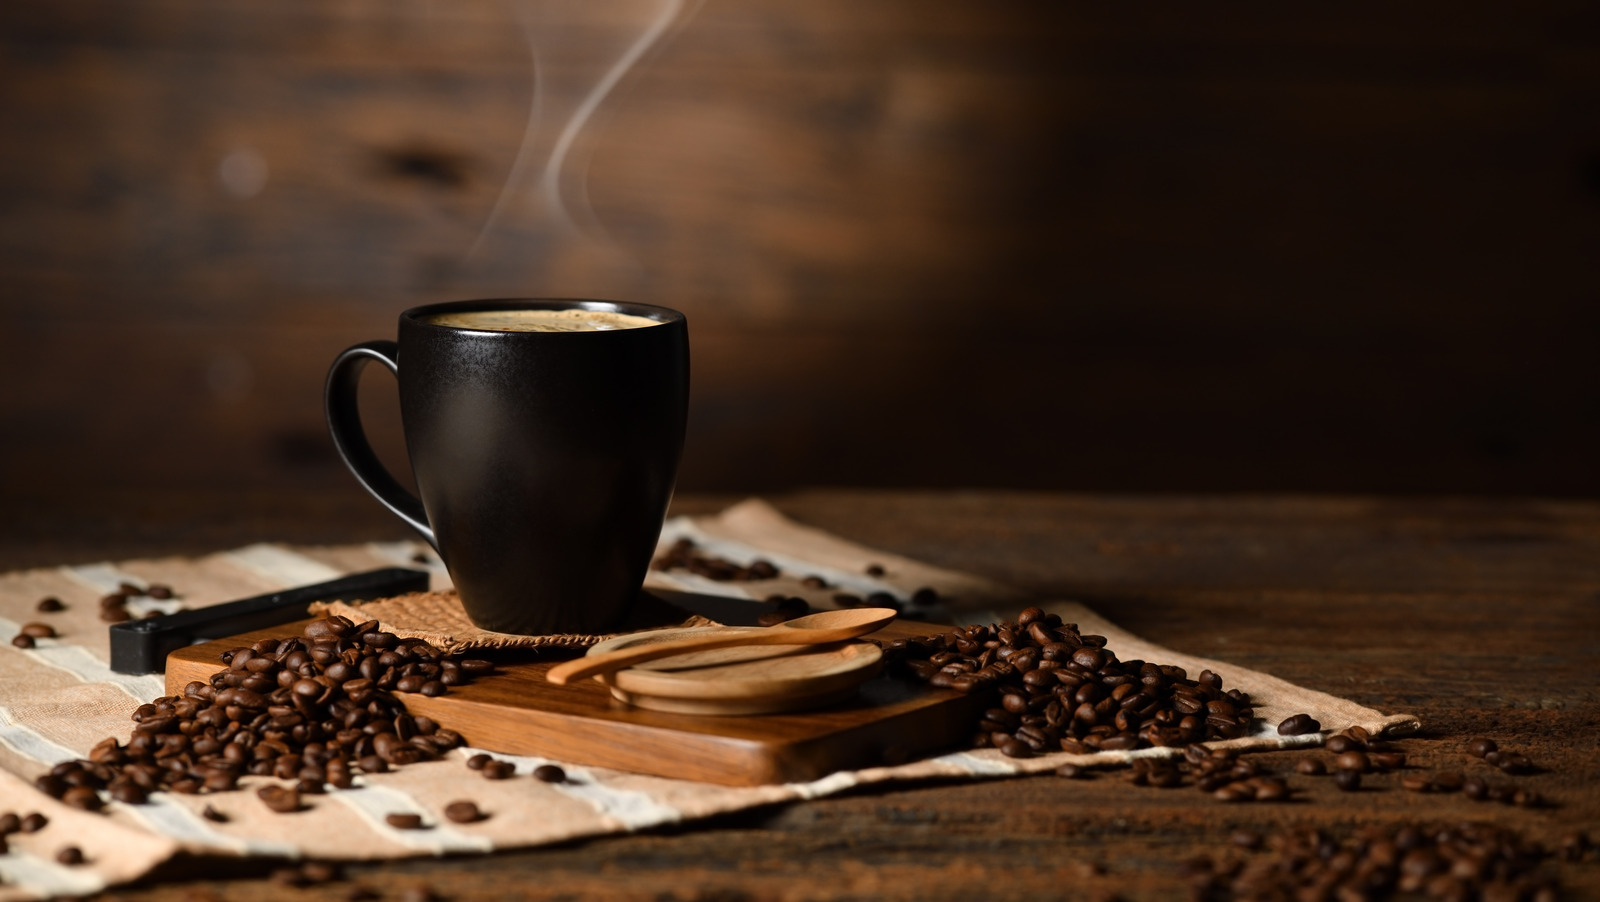 Is Reheating Coffee Safe?